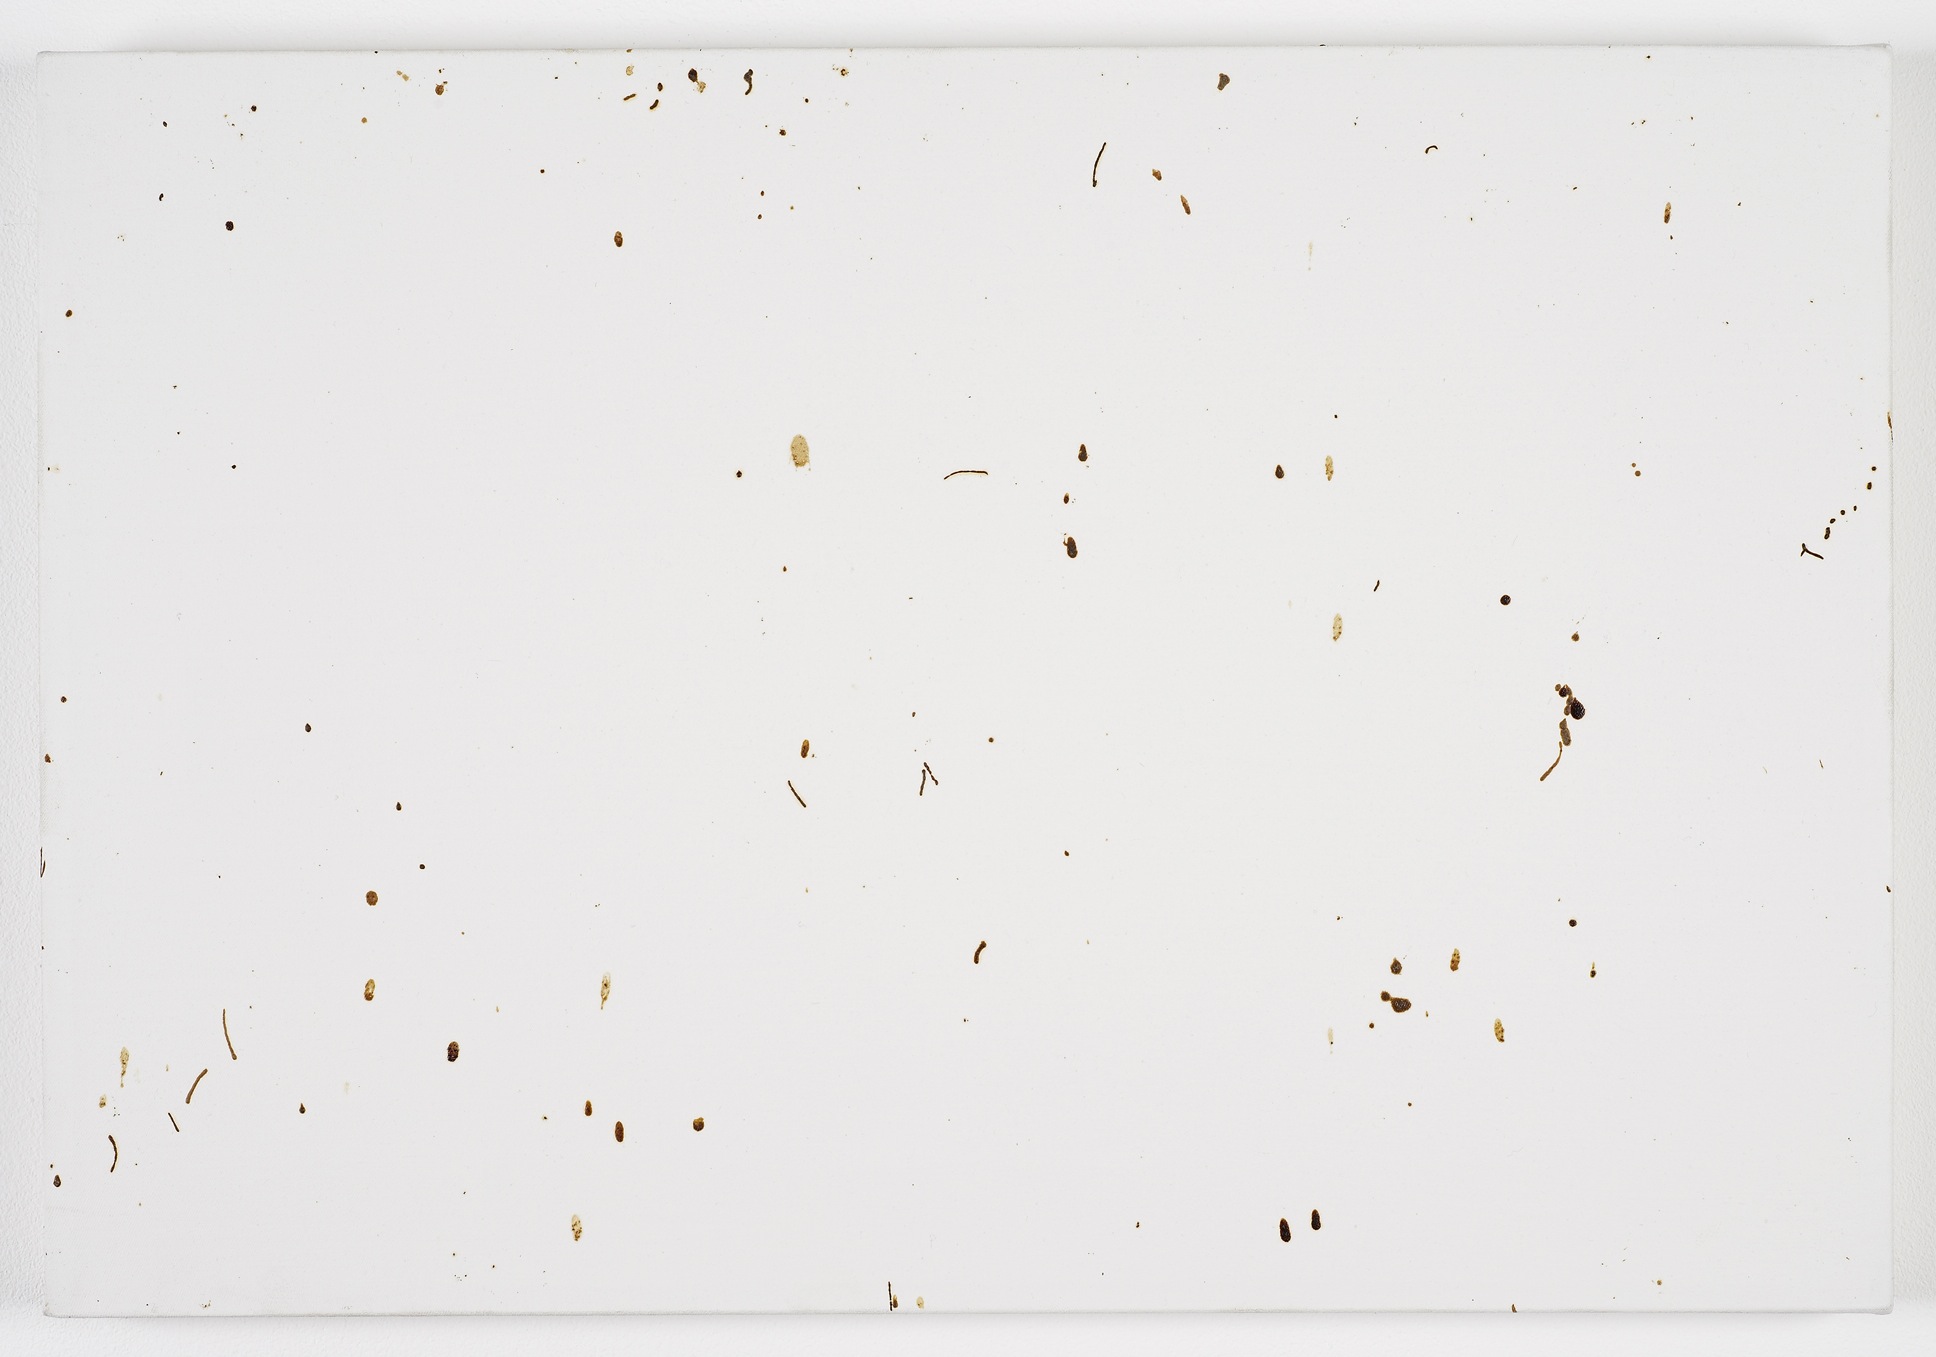     Bee Painting, Small Screen IV 2009 Bee droppings on grounded canvas 41 x 60 cm 